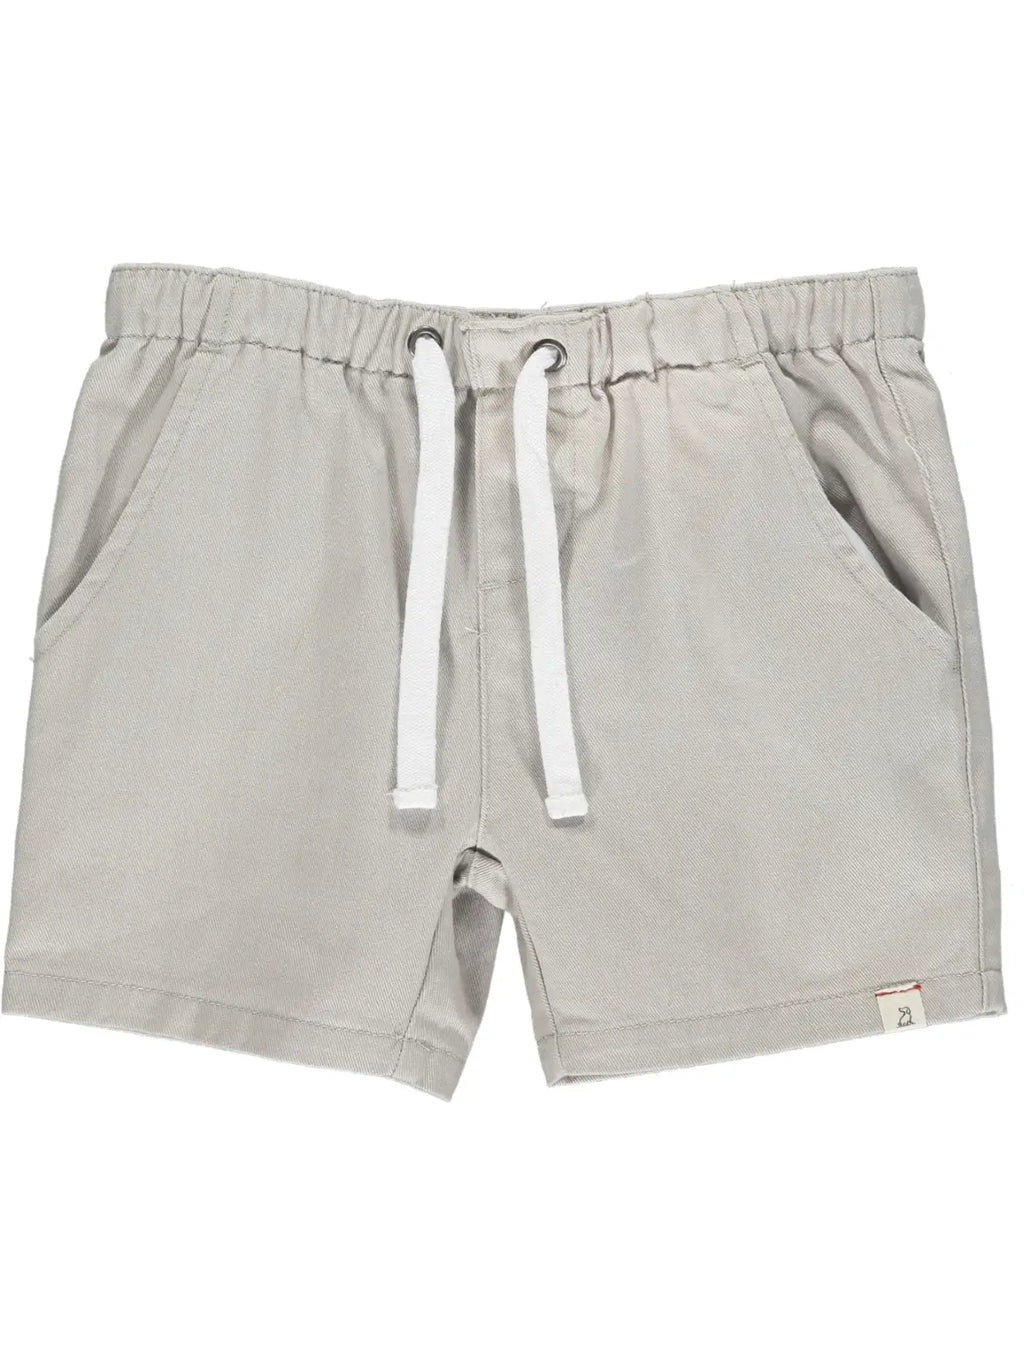 Me & Henry Hugo Twill Shorts in Pale Grey